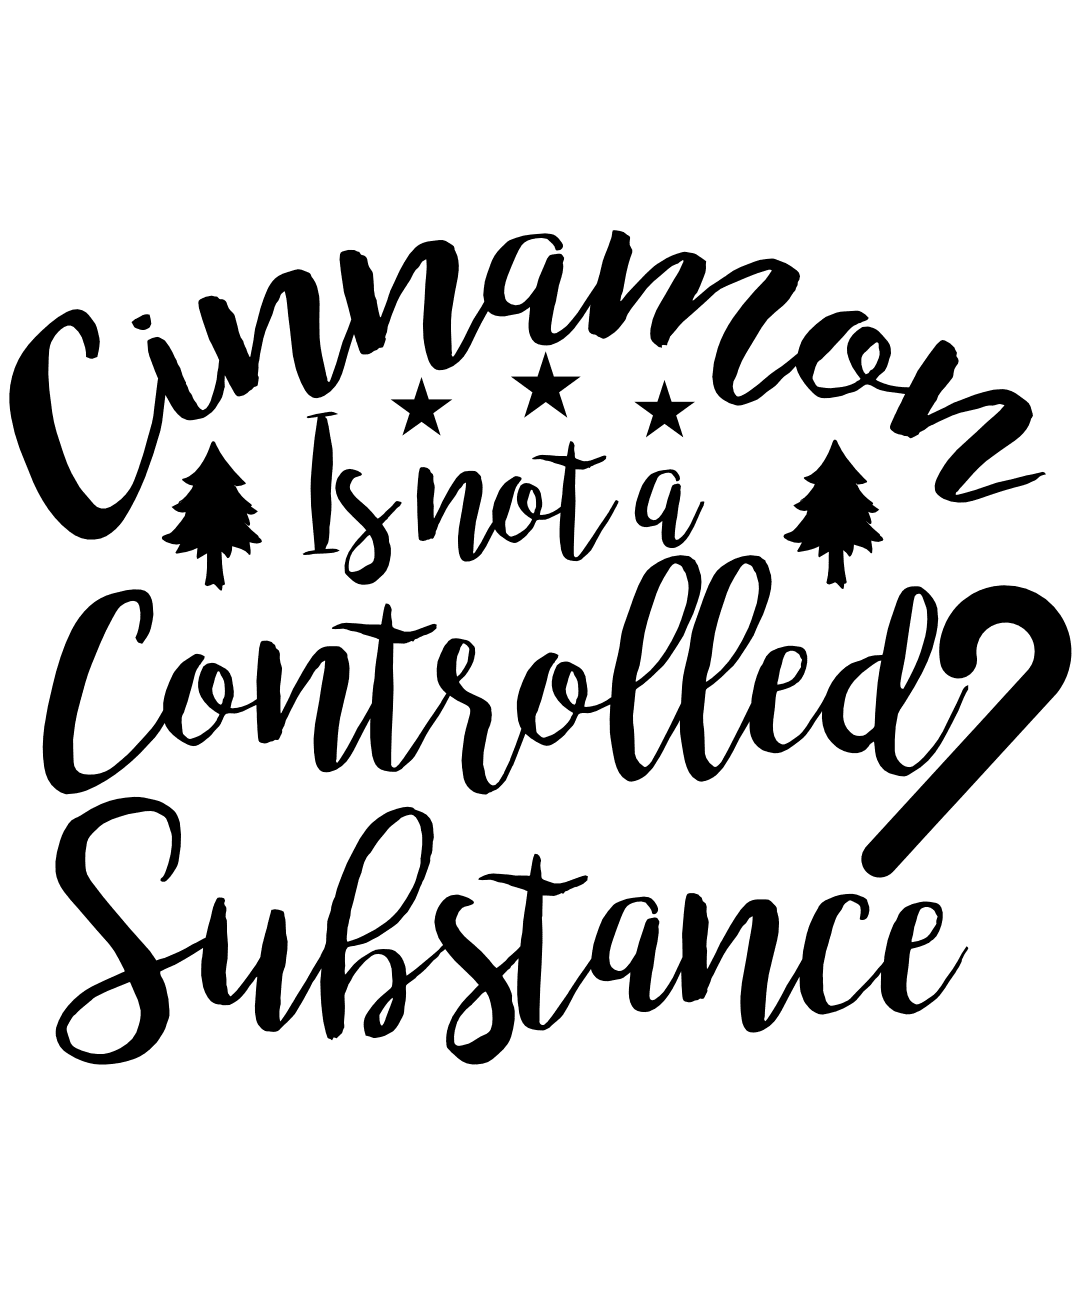 cinnamon-is-not-a-controlled-substance-christmas-free-svg-file-SvgHeart.Com